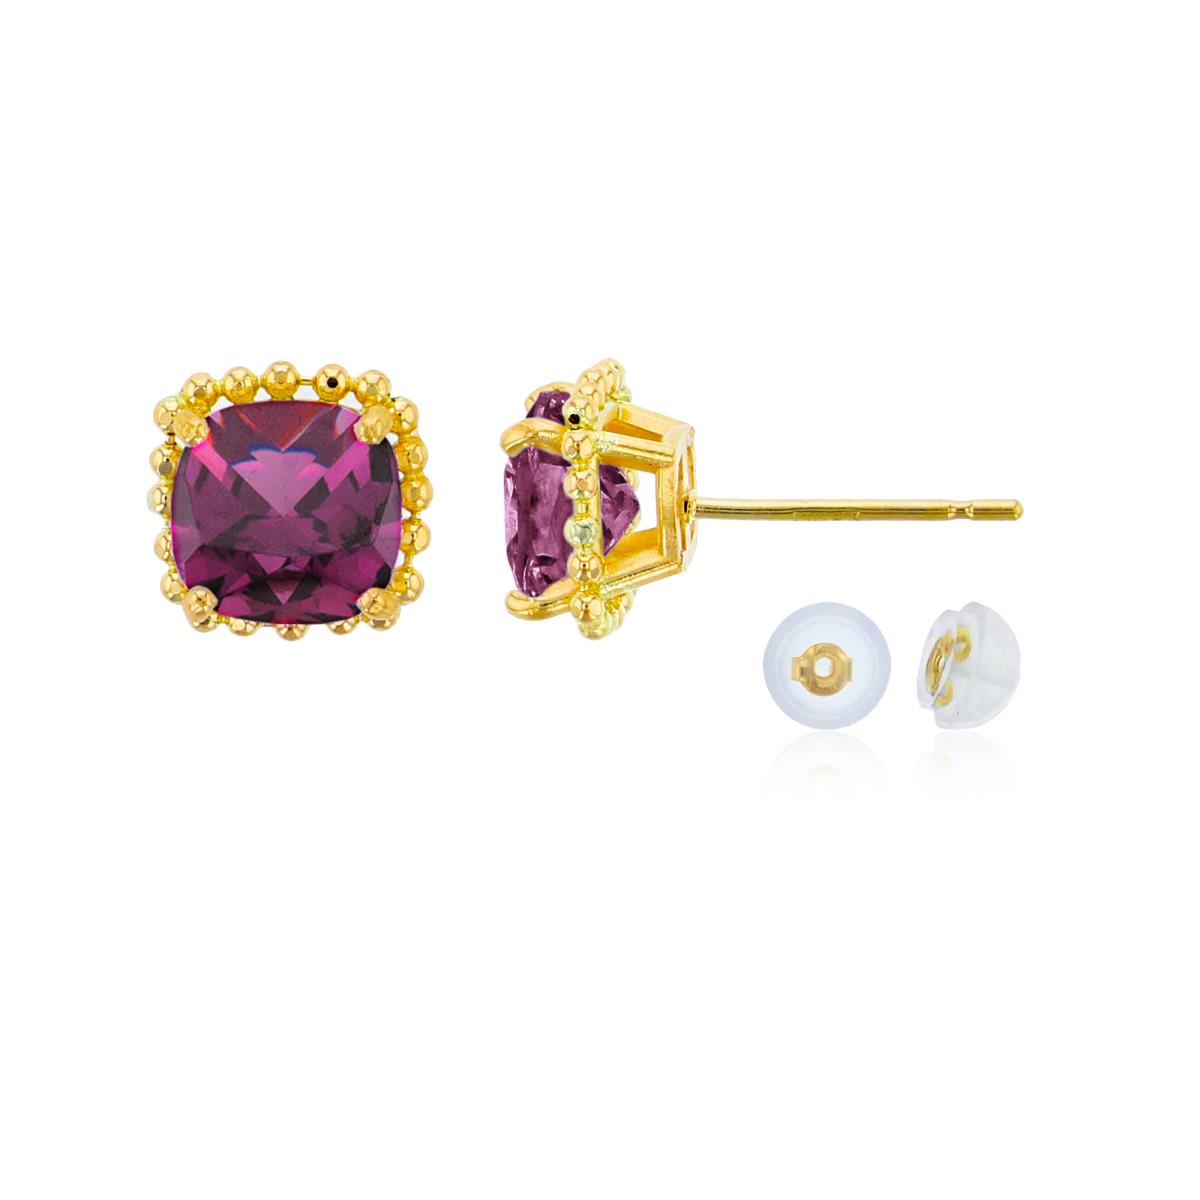 10K Yellow Gold 6x6mm Cushion Cut Rhodolite Bead Frame Stud Earring with Silicone Back